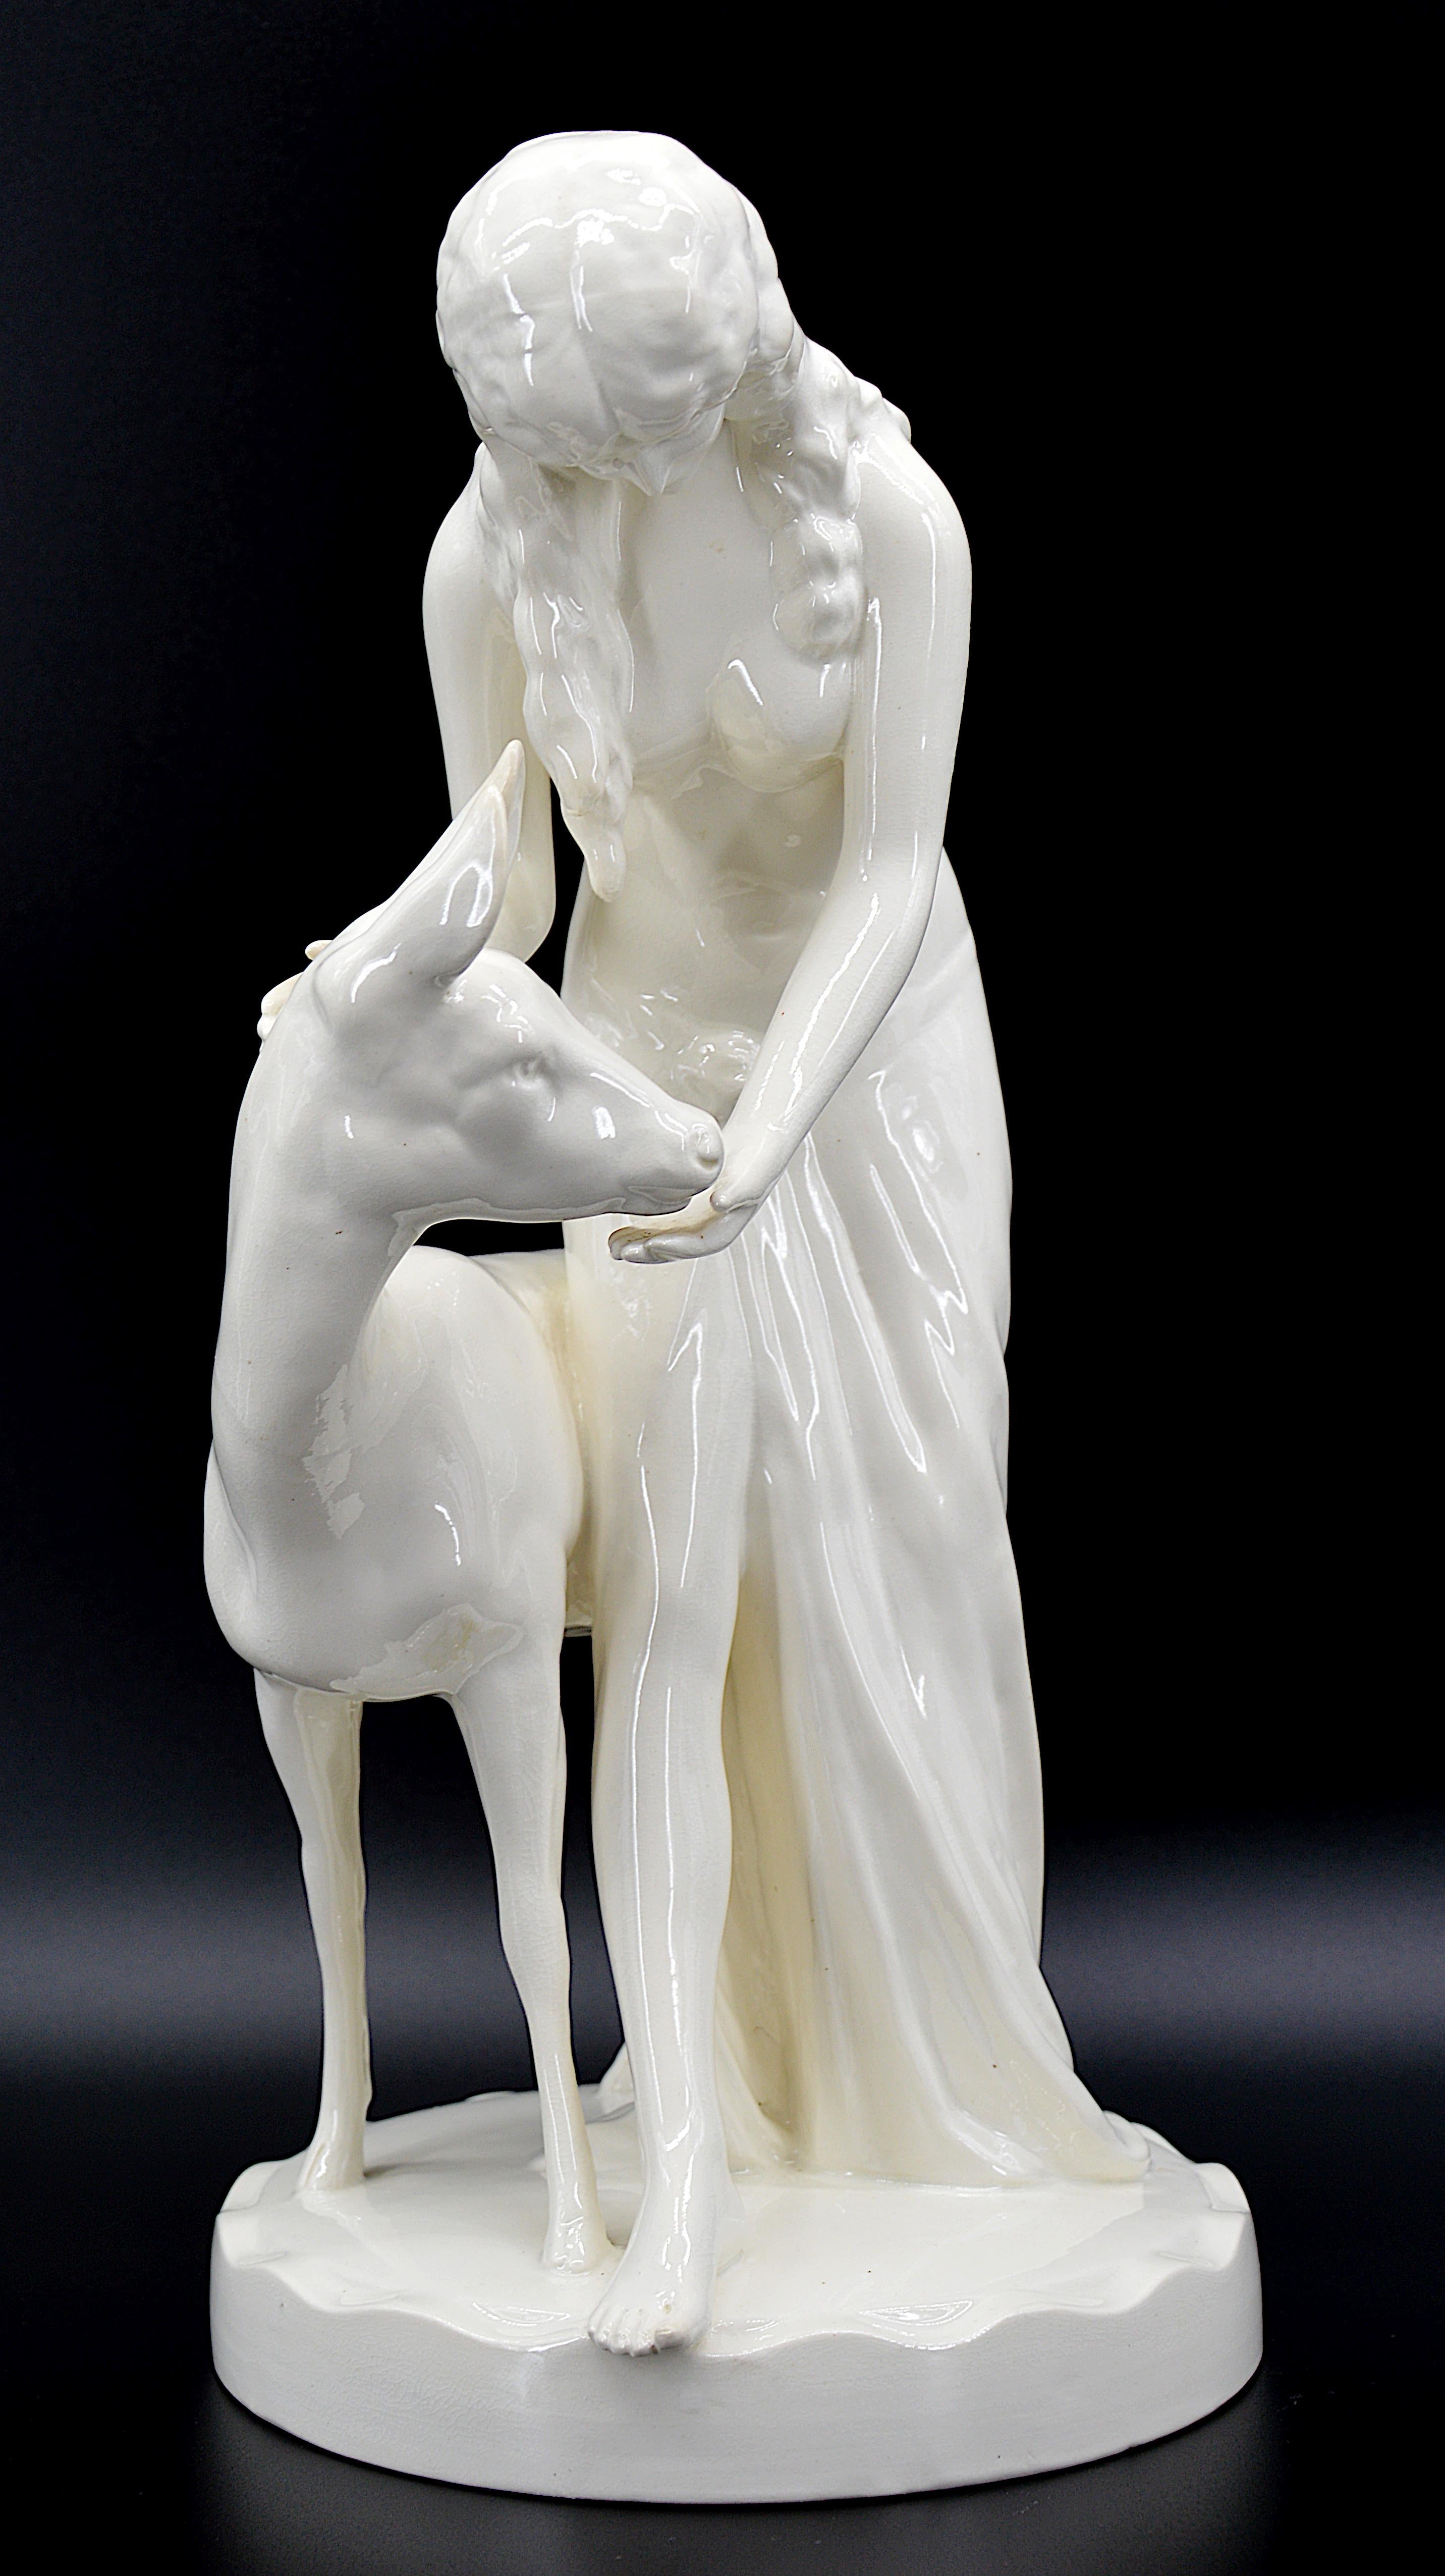 Royal Dux Crackle Glaze Ceramic Sculpture, the Young Lady and the Fawn 1918-1925 In Excellent Condition For Sale In Saint-Amans-des-Cots, FR